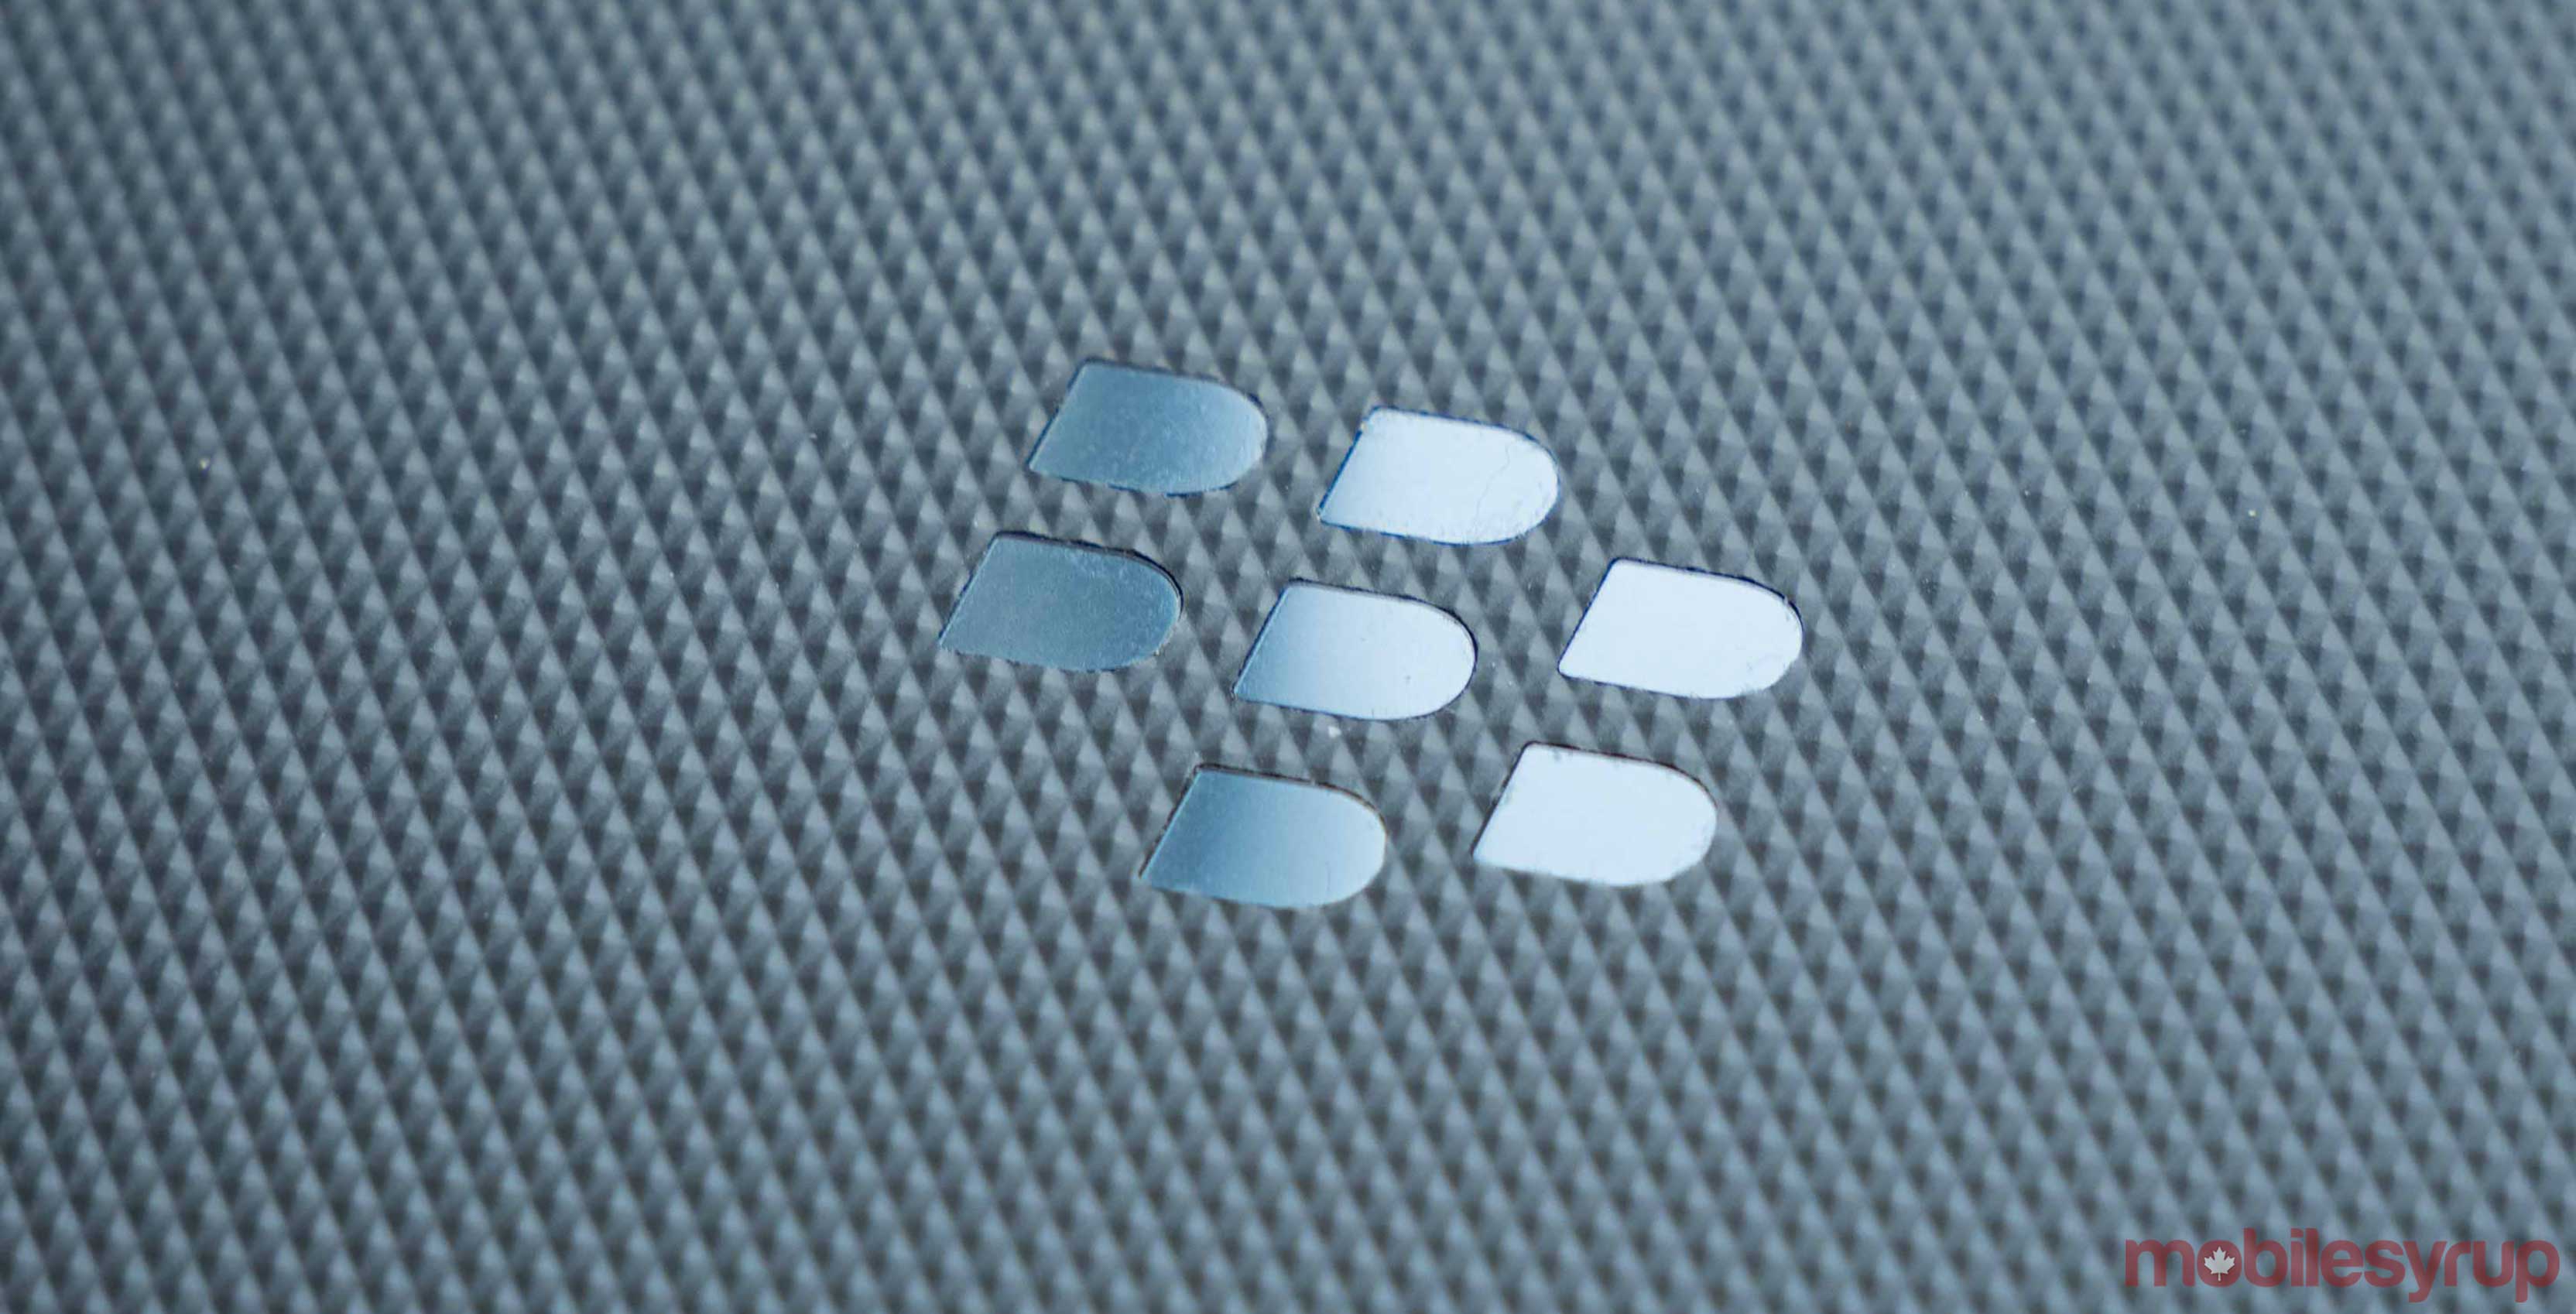 BlackBerry Company Logo - China-based smartphone manufacturer NDT will develop 'BlackBerry ...